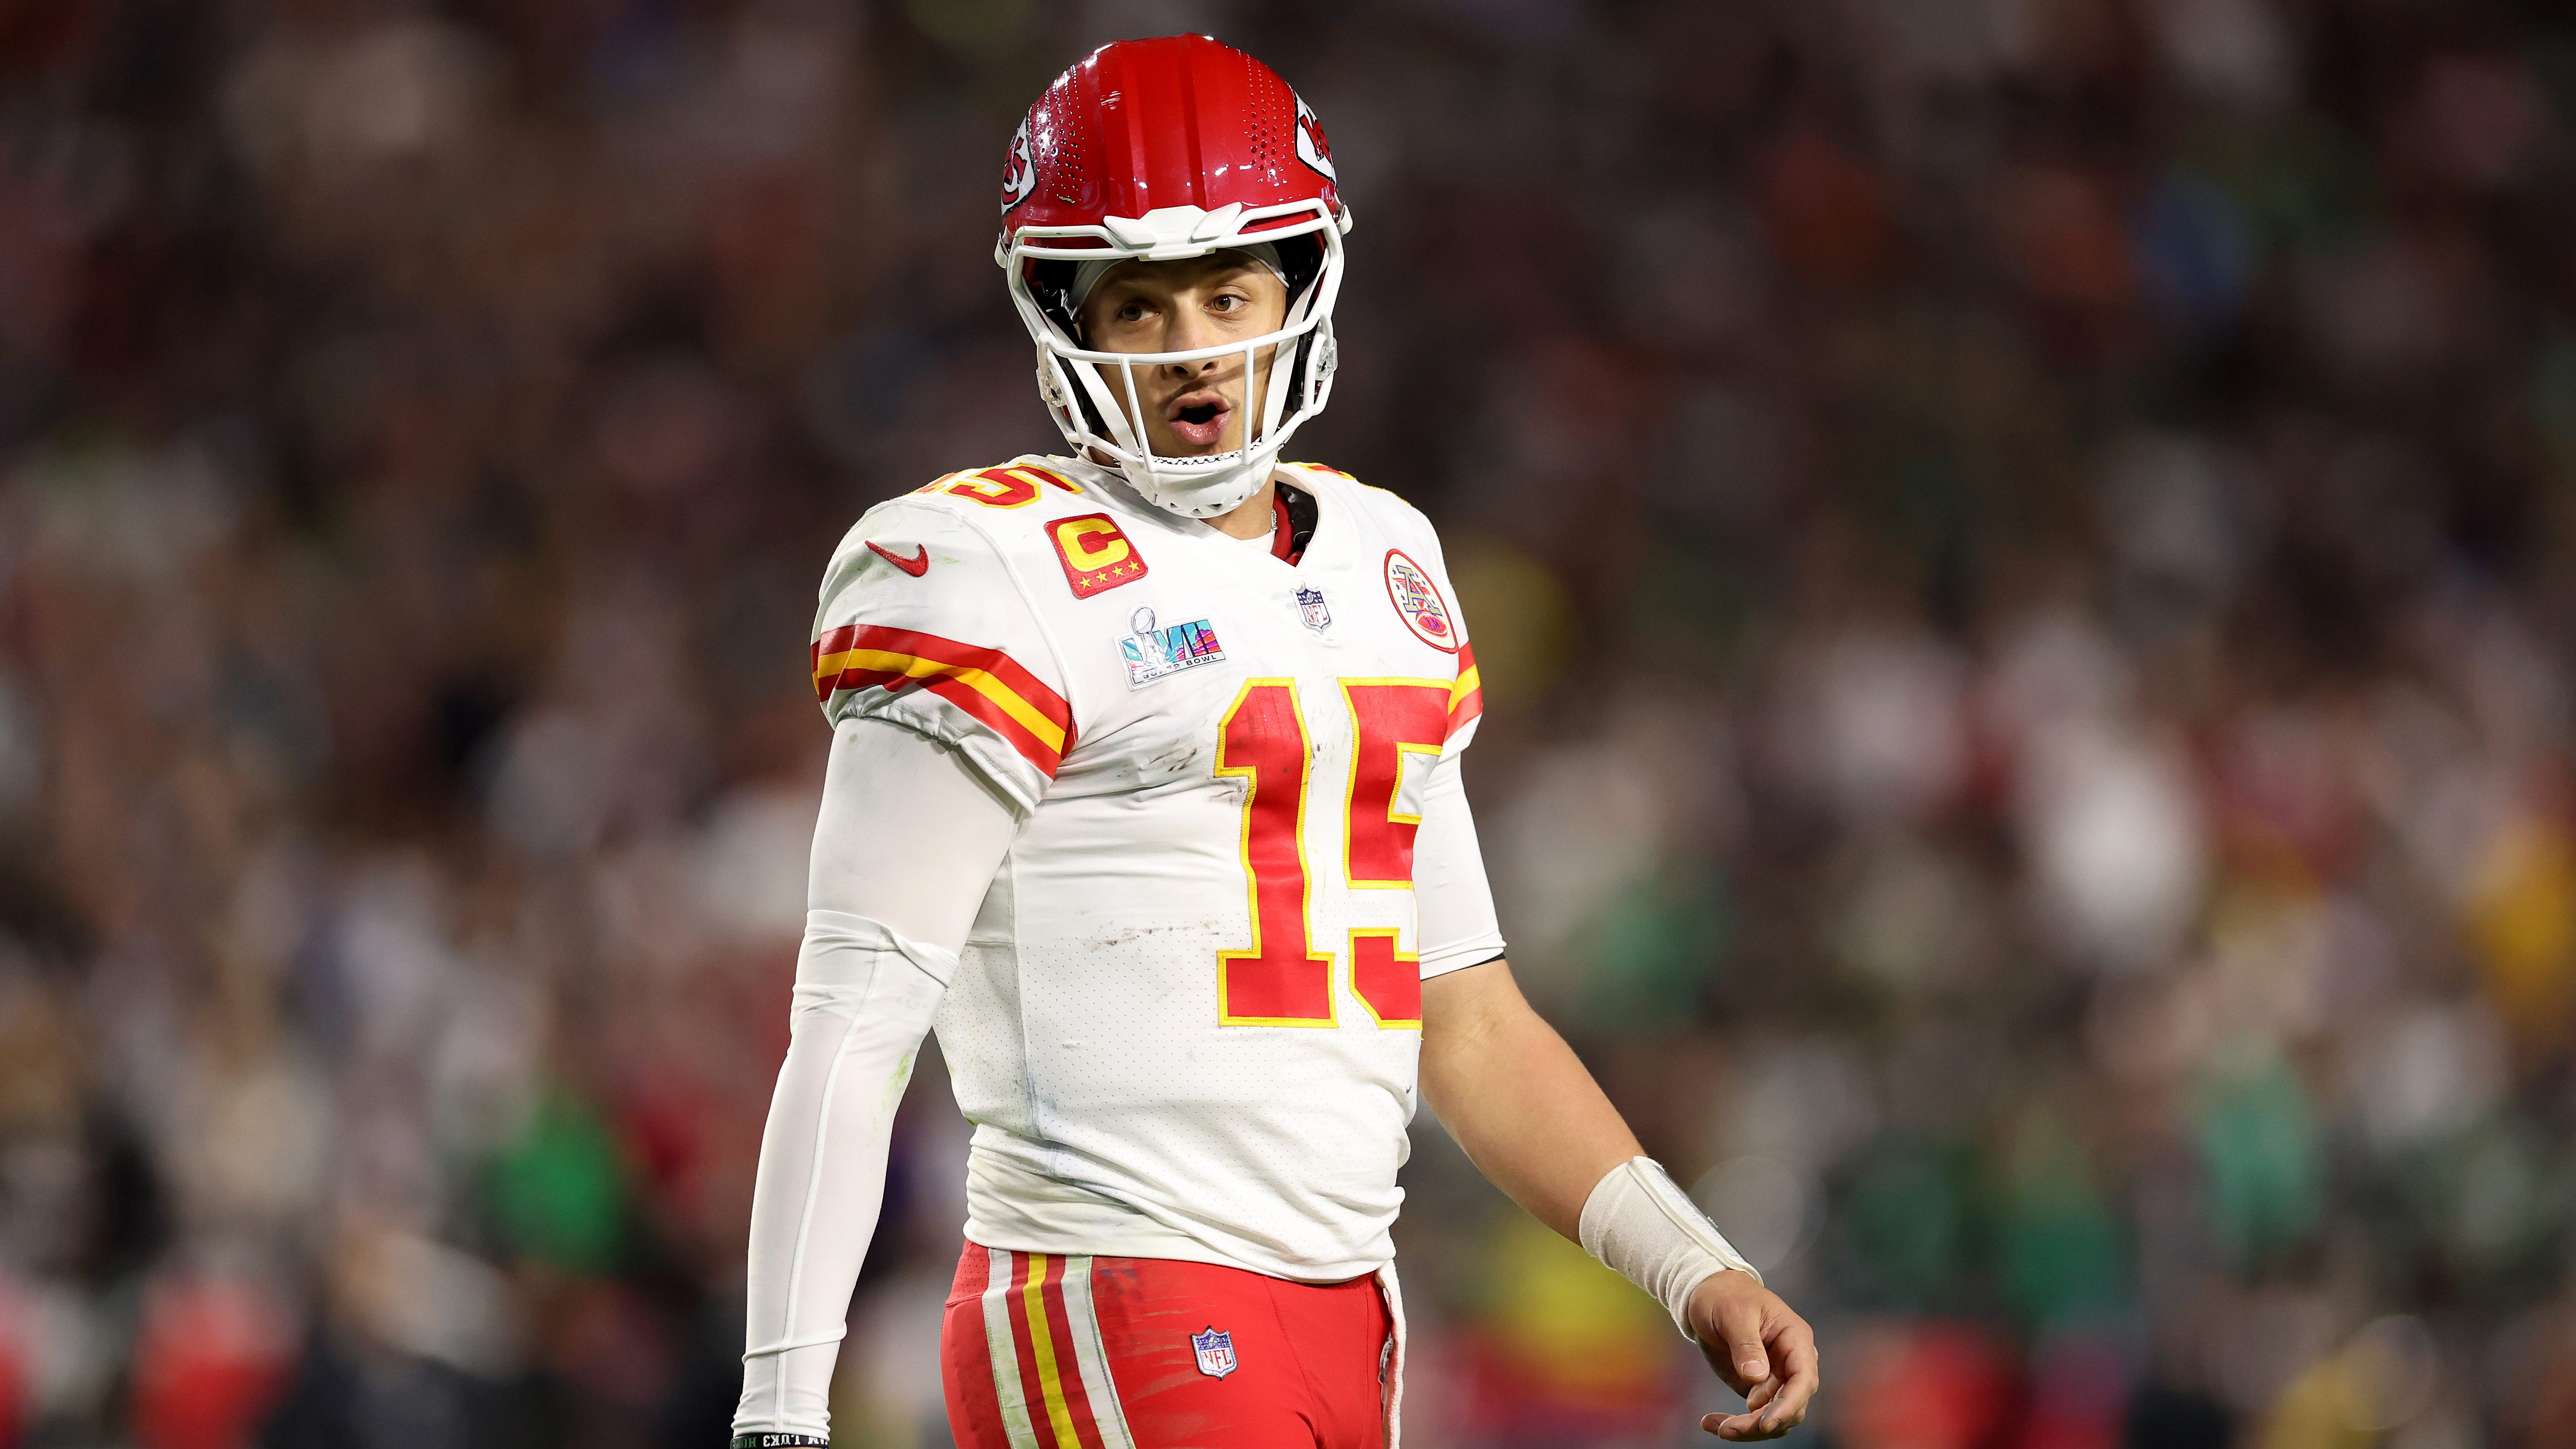 L.A. to Vegas: Patrick Mahomes' Bachelor Weekend And Whitney